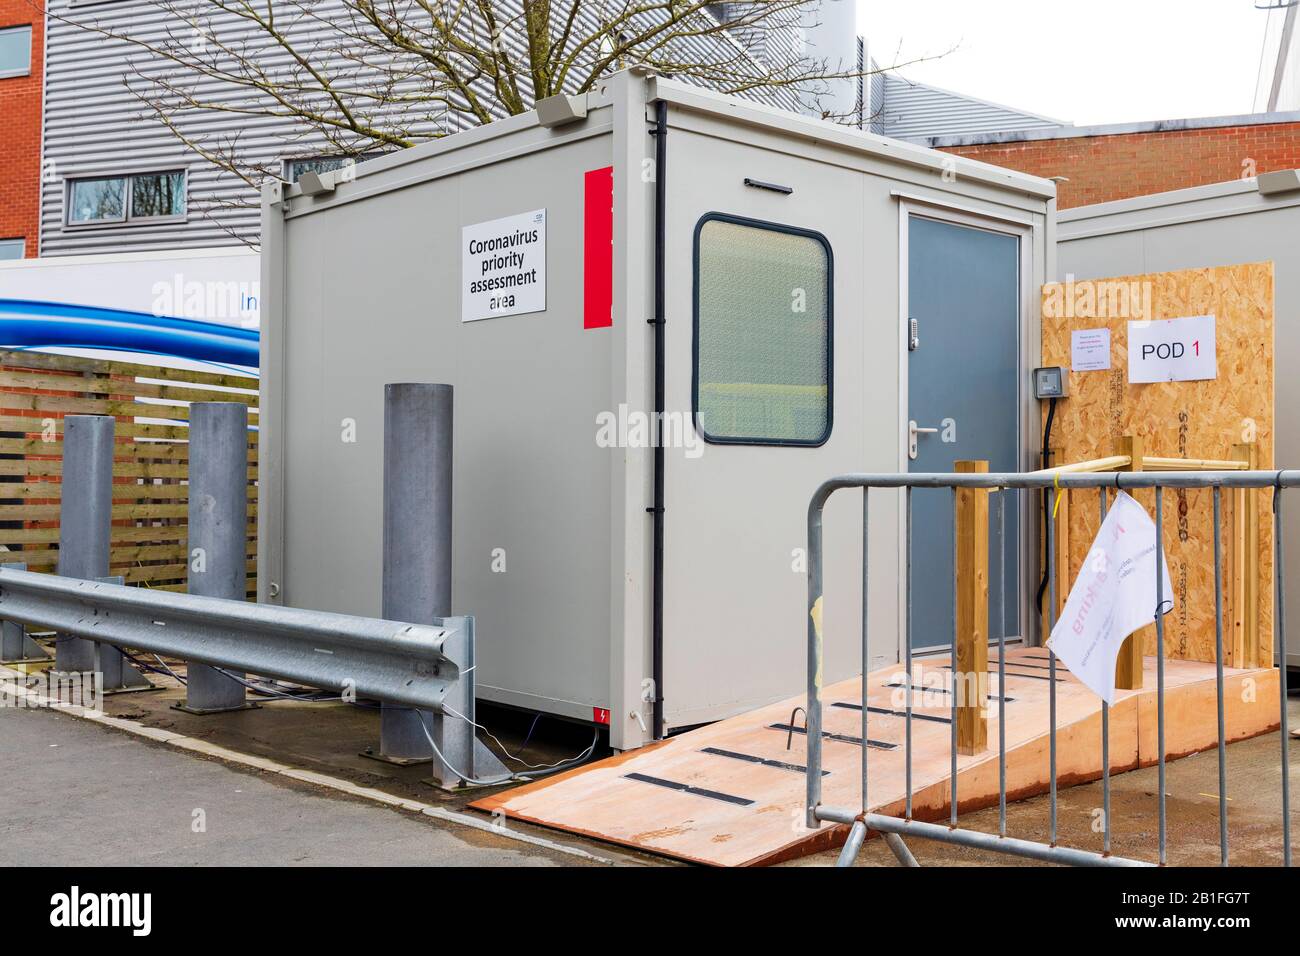 Coronavirus pods kabin assessment pod at a UK hospital. Isolation pod to assess patients without going in to A&E. Stock Photo